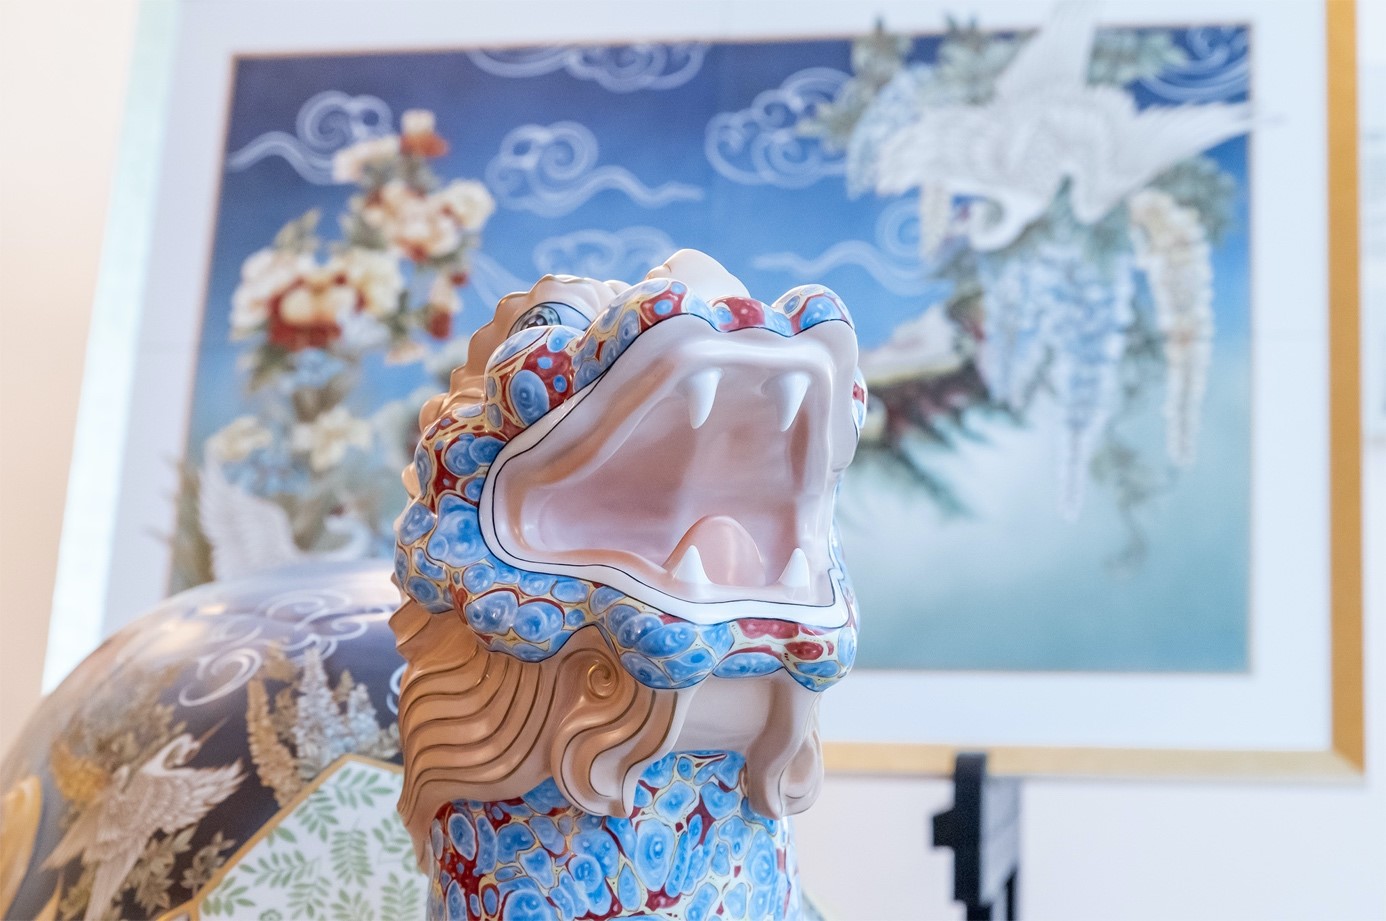 szechenyi-istvan-university-an-exclusive-herend-porcelain-exhibition-opened-in-the-ovar-castle.jpeg